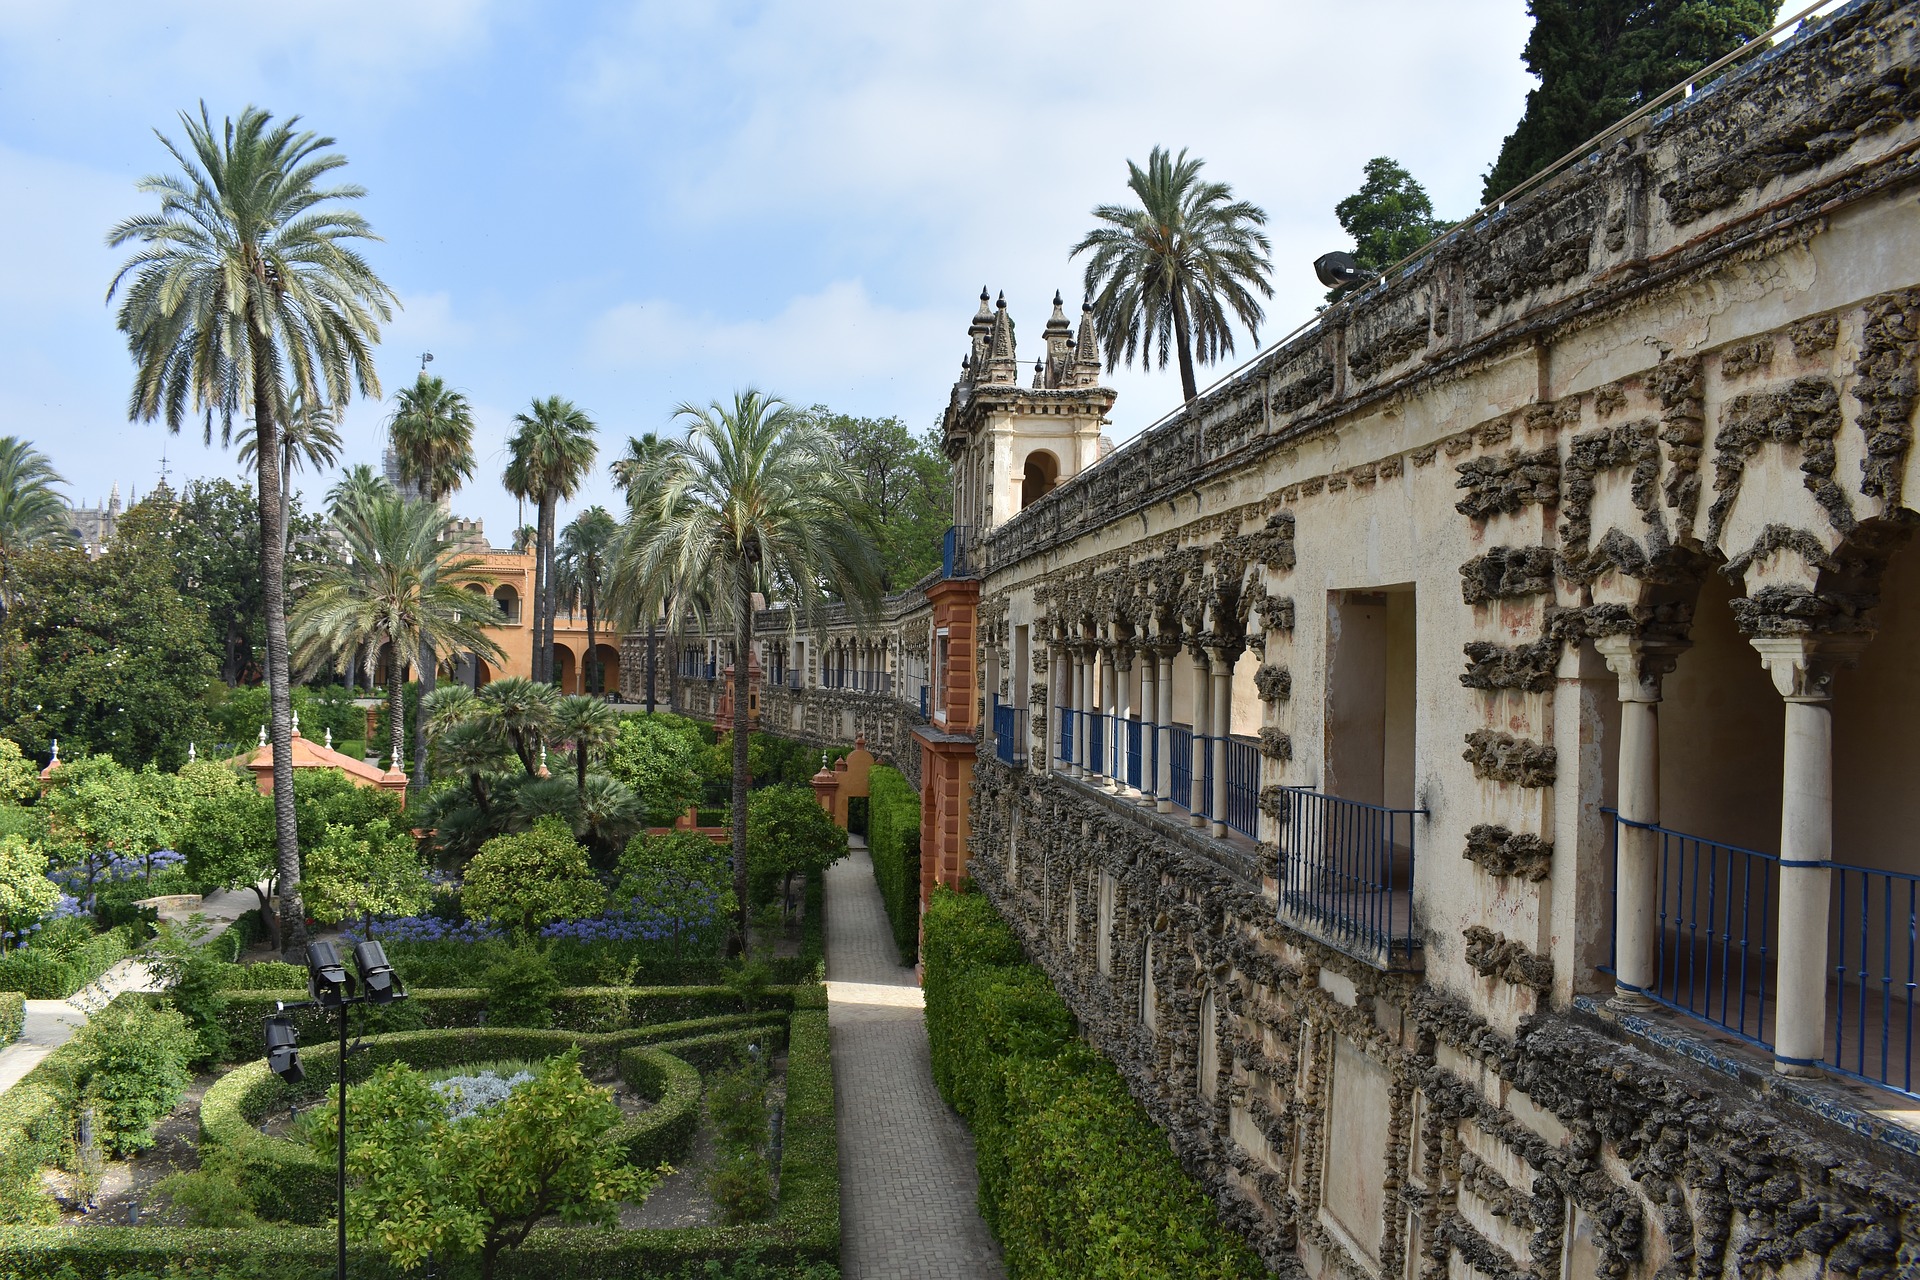 The Best of Spain & Portugal - Real Alcázar Palace, Seville, Spain